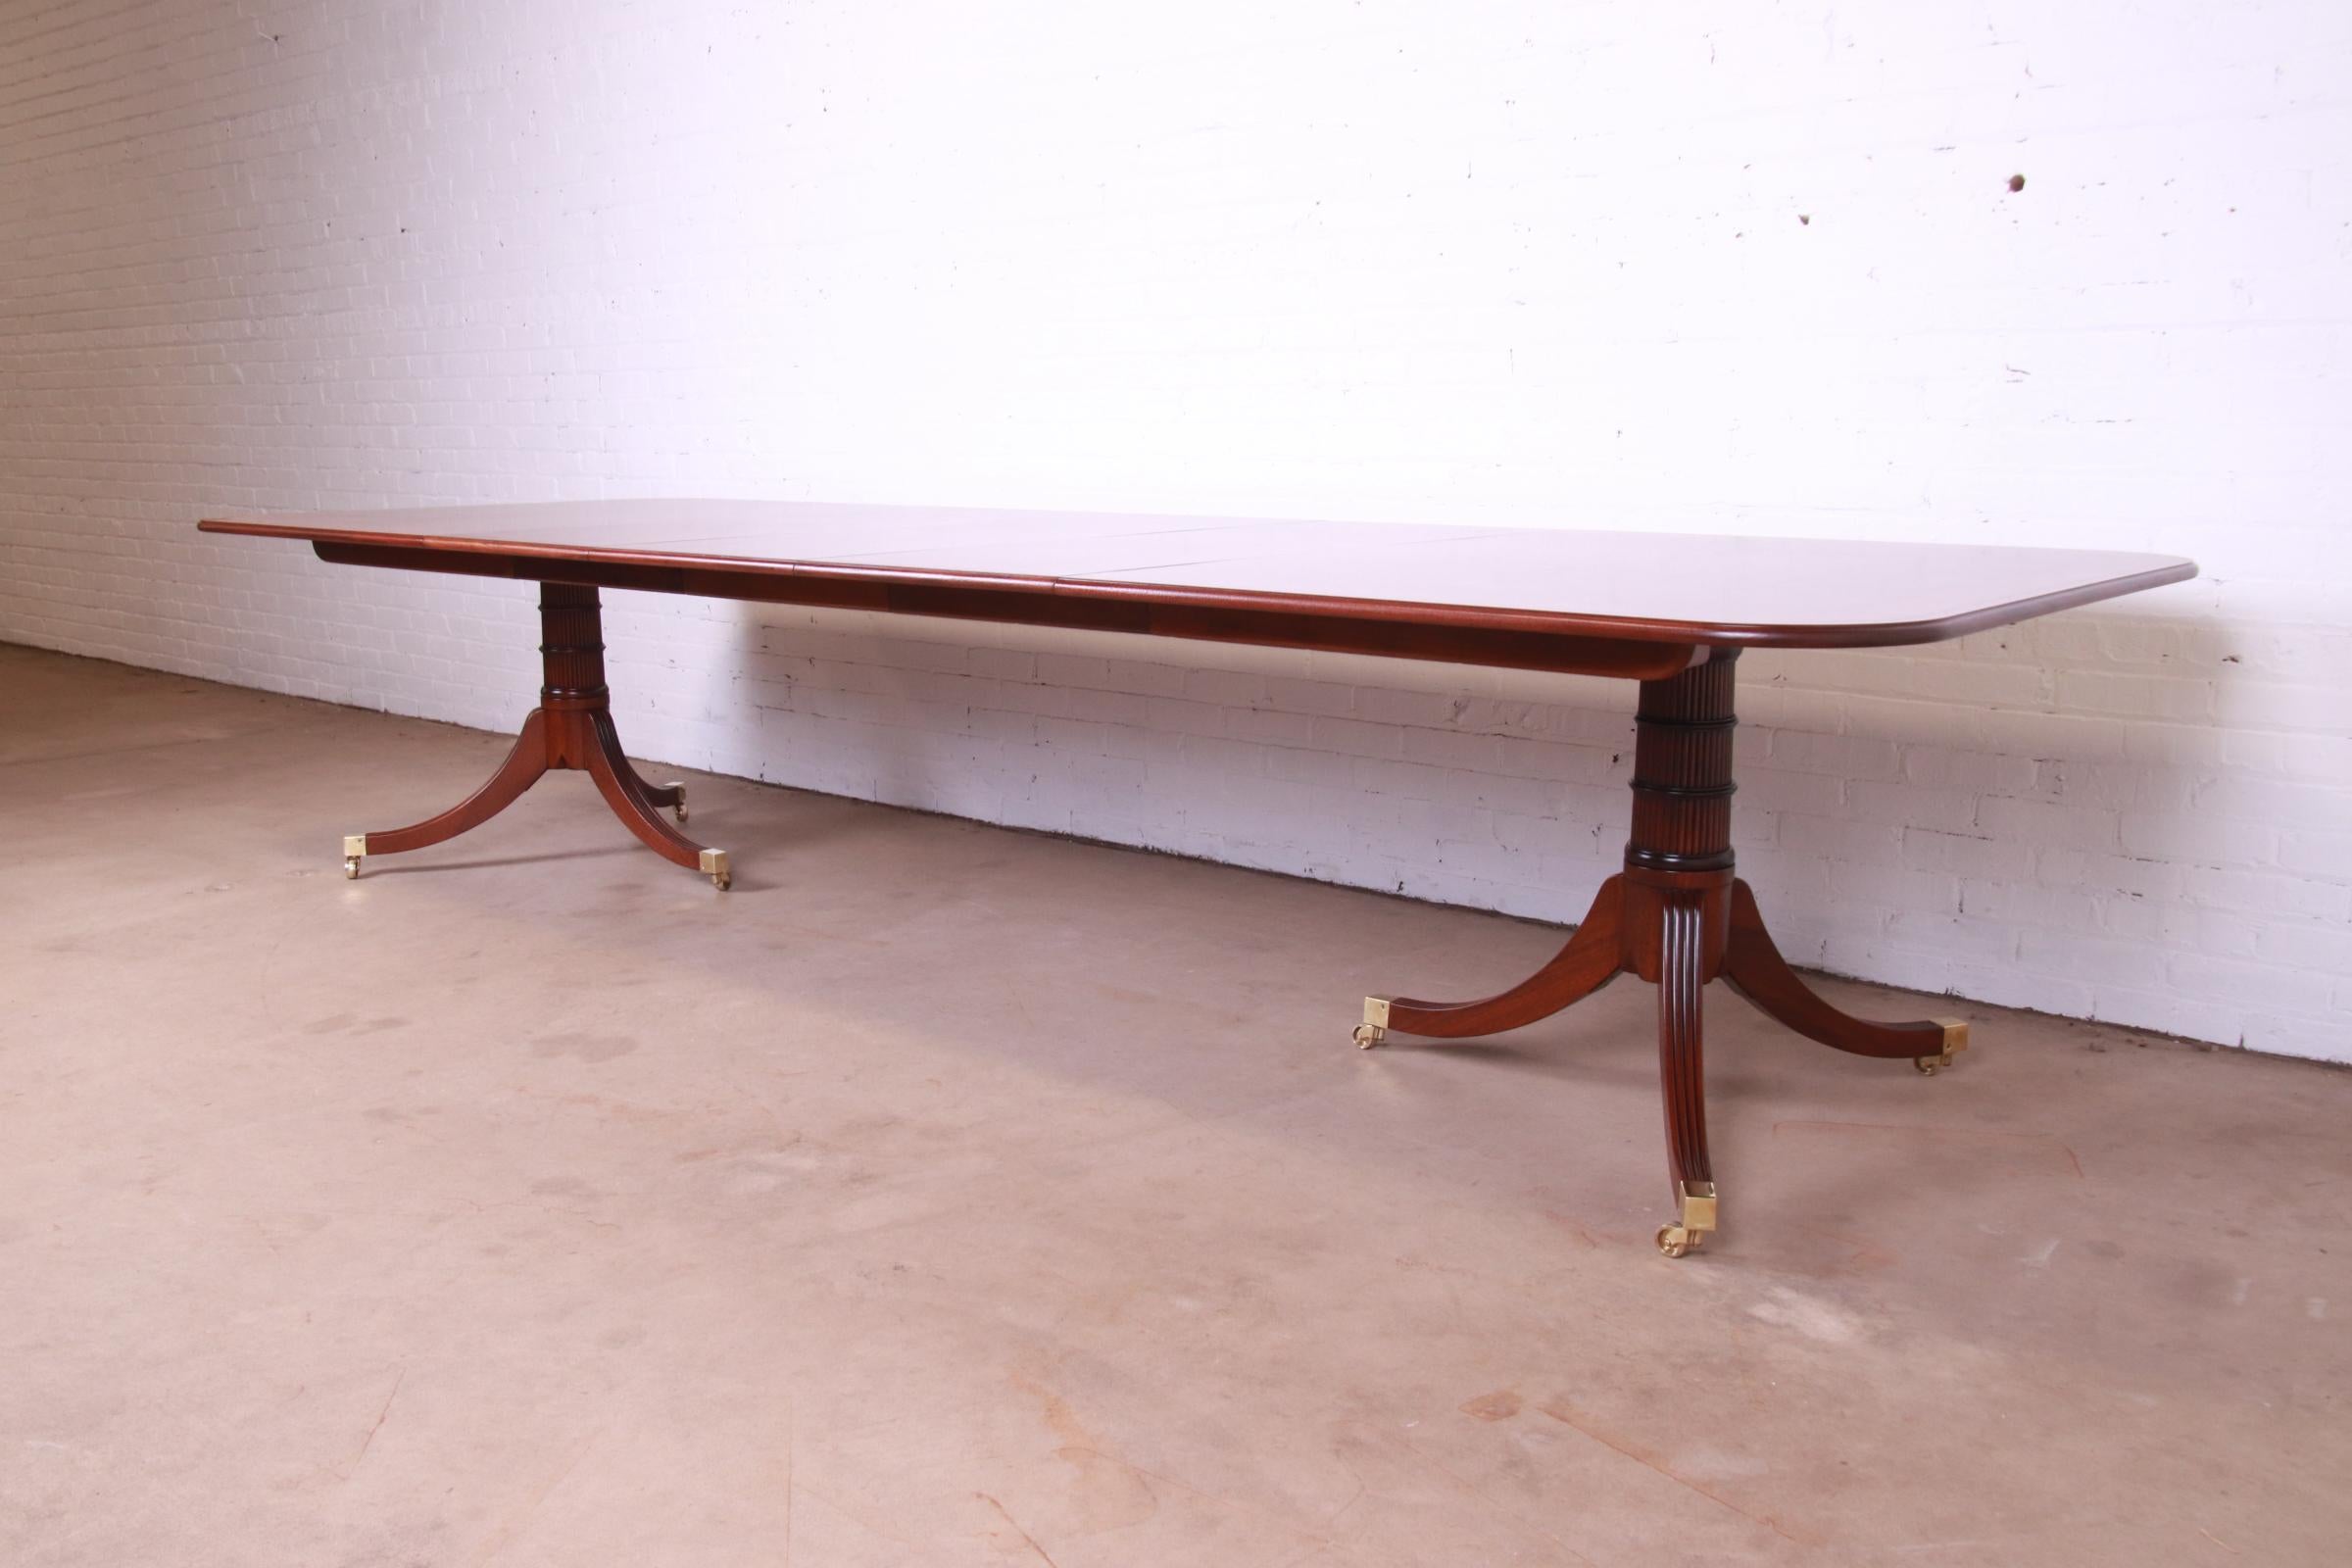 A rare and outstanding Regency double pedestal extension dining table

By Baker Furniture, 